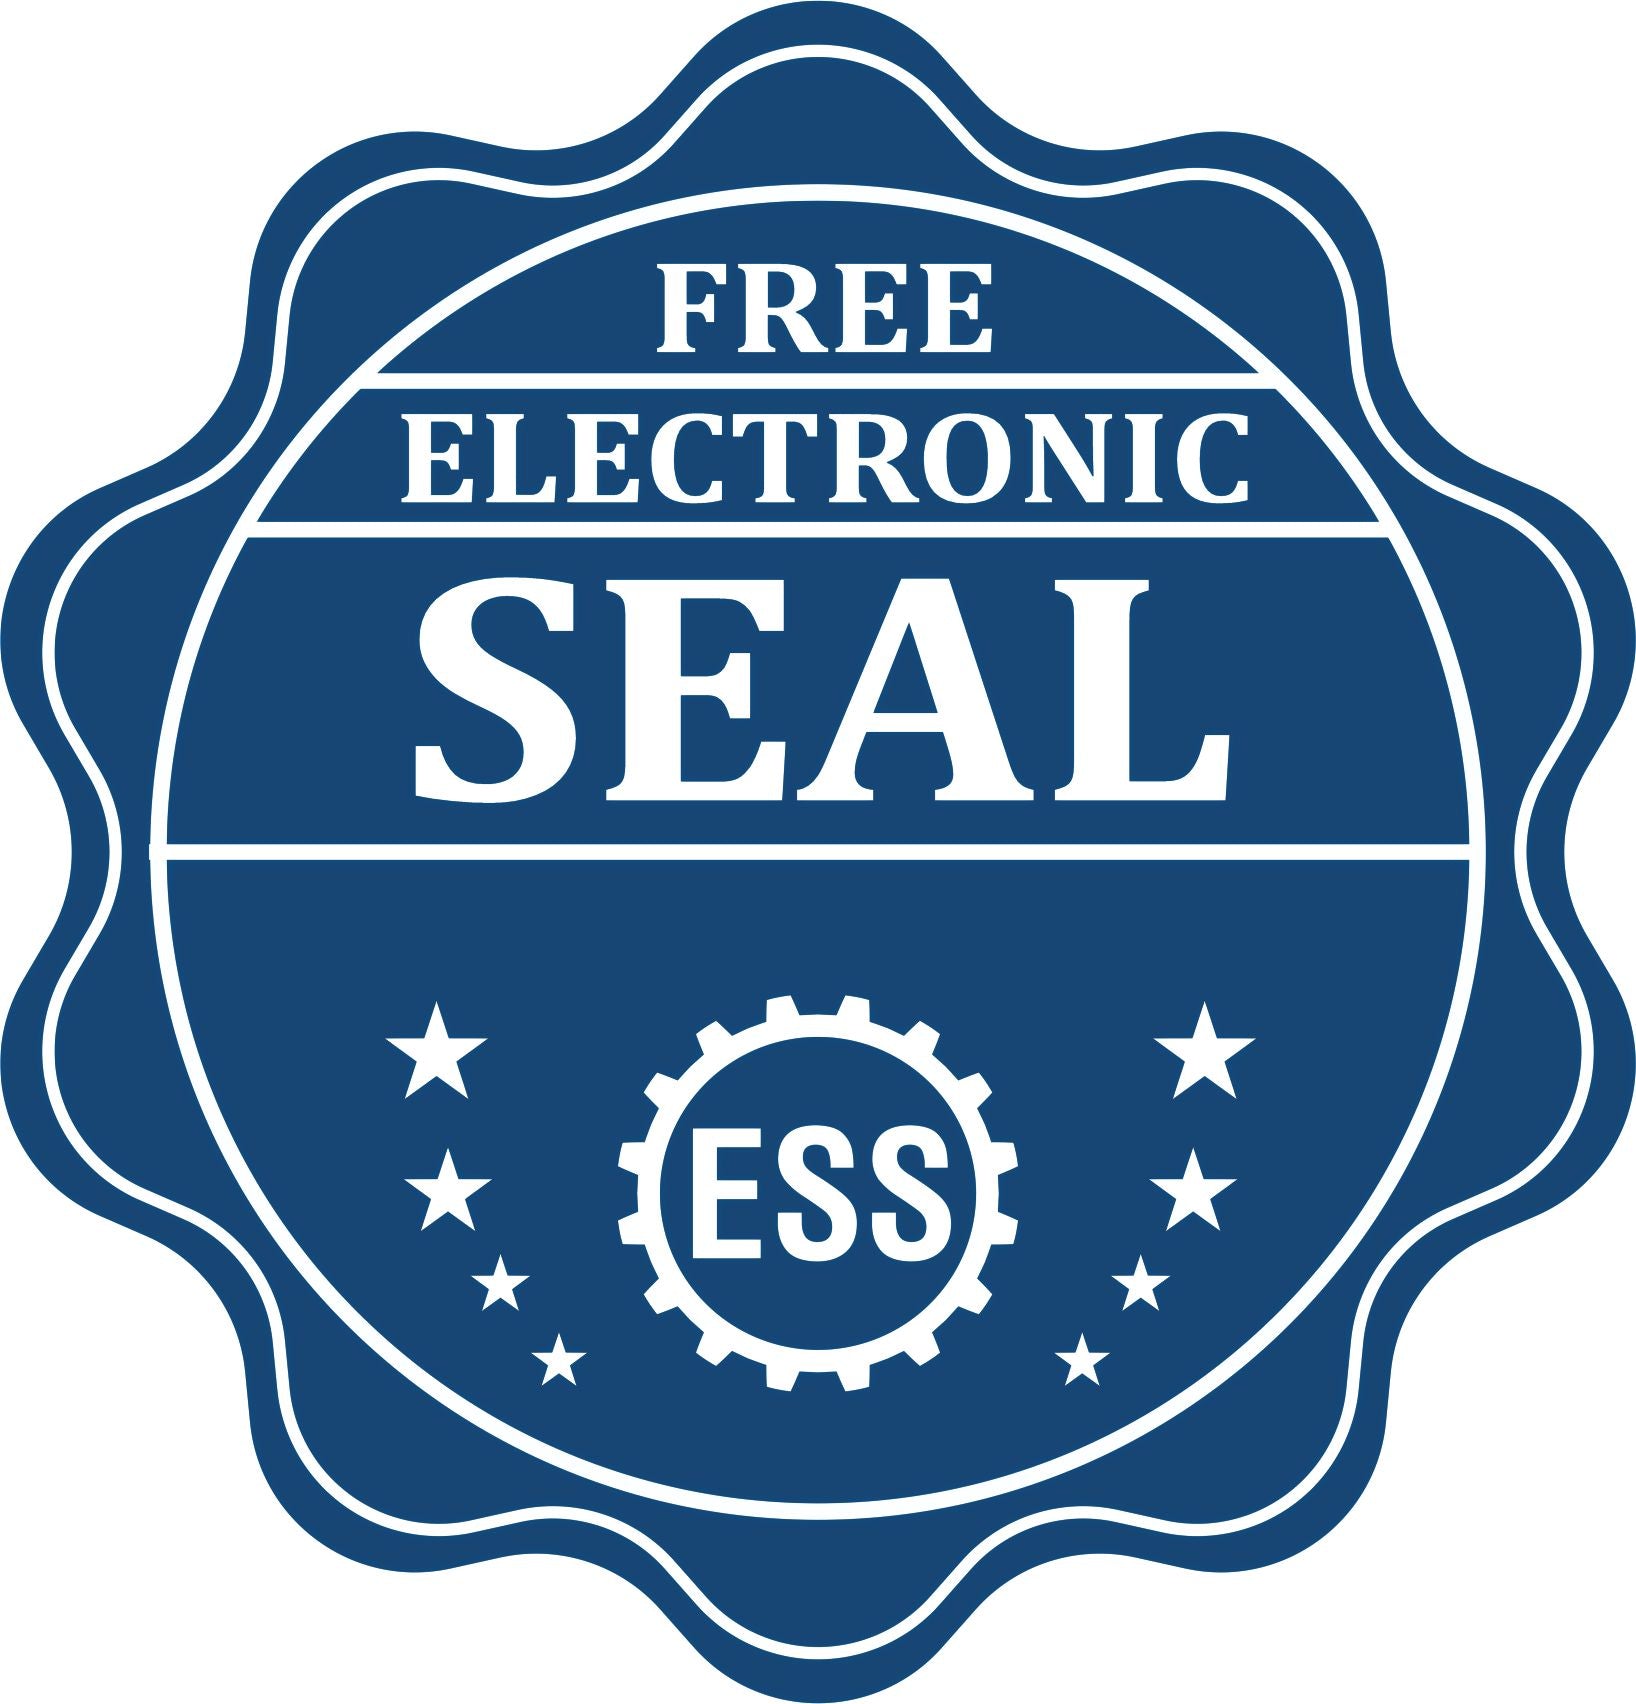 A badge showing a free electronic seal for the Hybrid South Dakota Engineer Seal with stars and the ESS gear on the emblem.